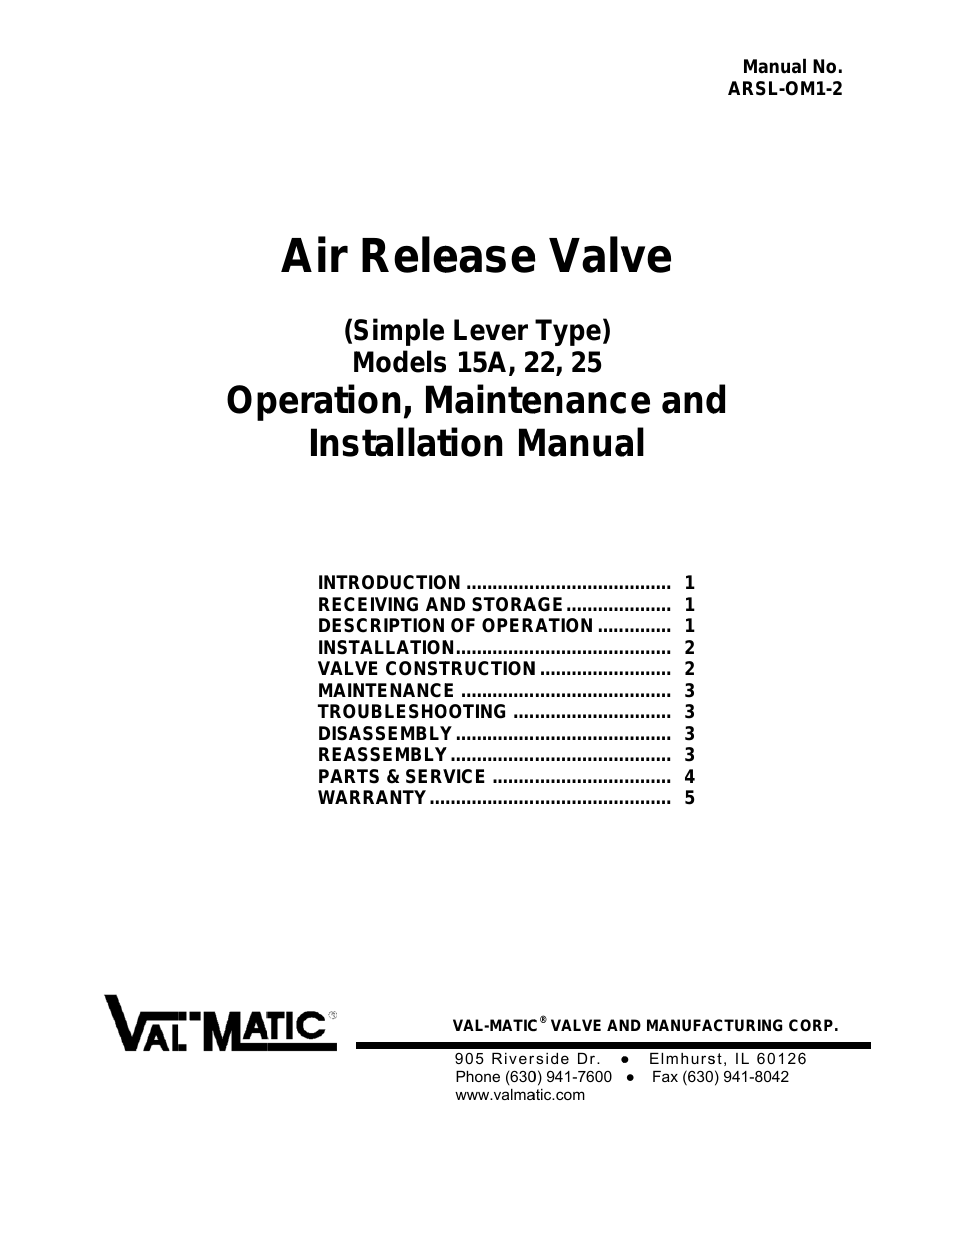 25 Air Release Valve (Simple Lever Type)